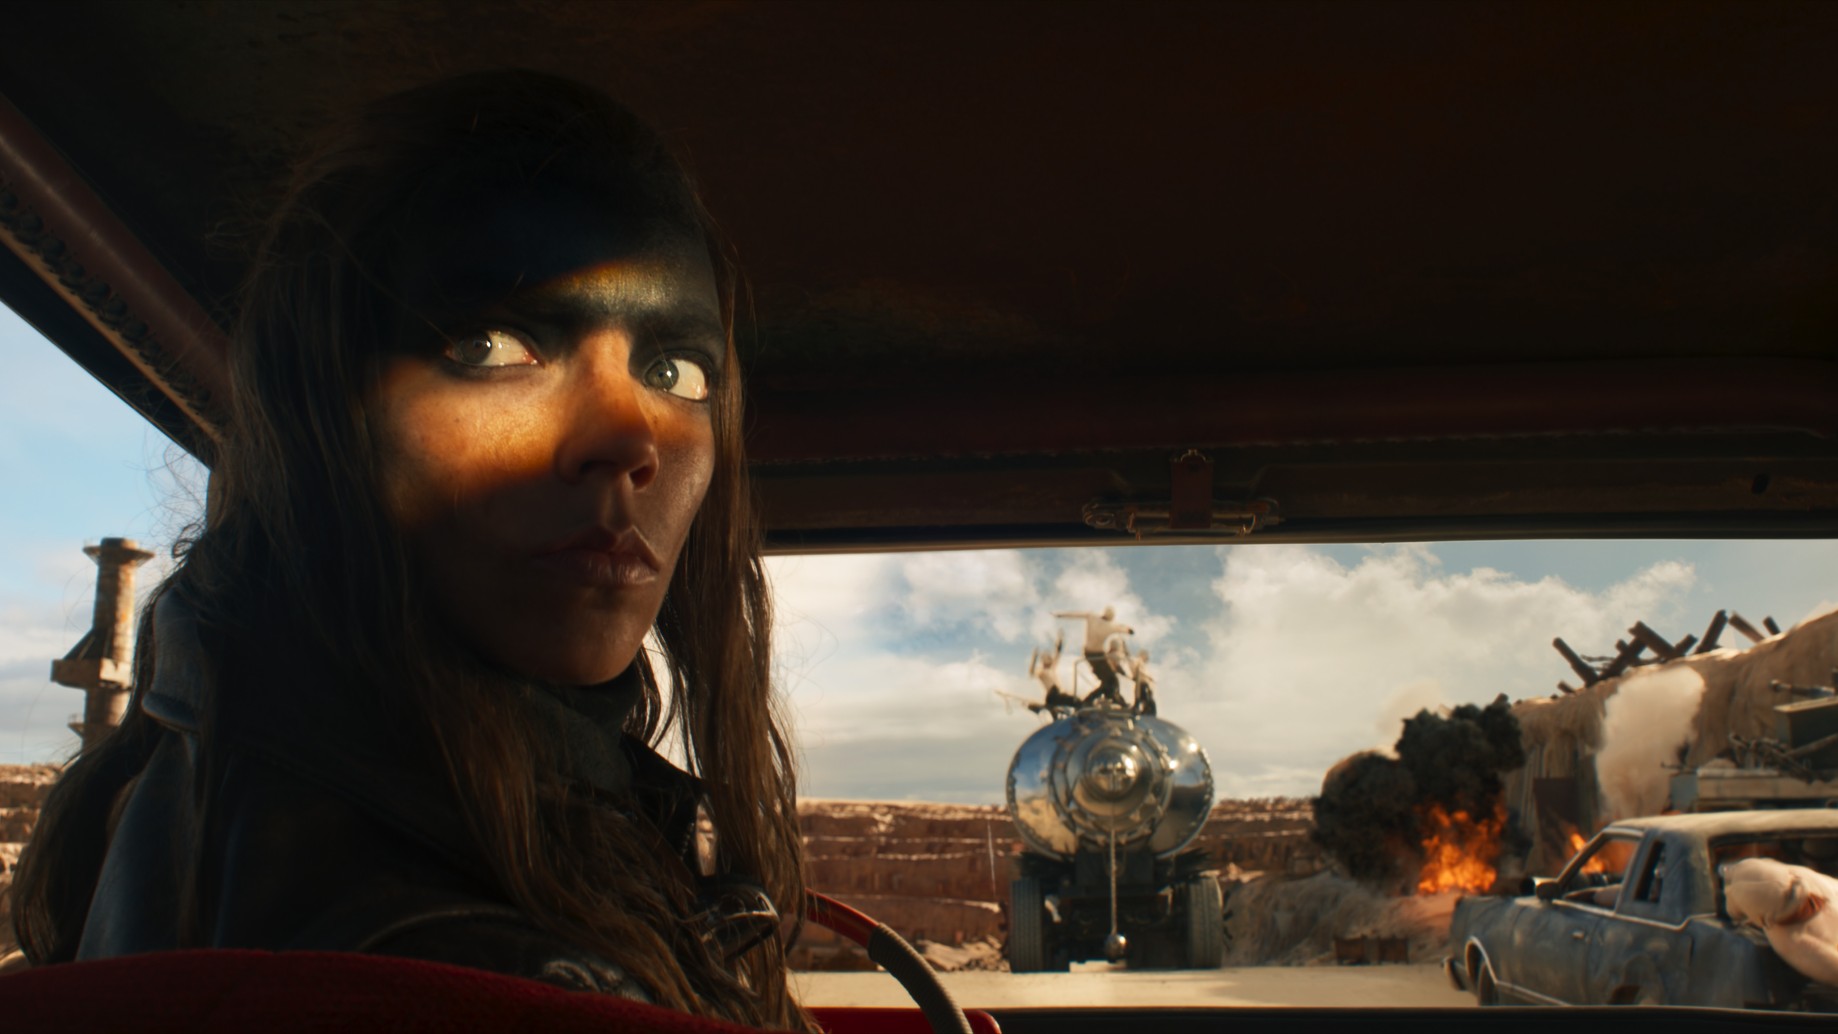  The daily gossip: Anya Taylor-Joy leads epic 'Furiosa' trailer, Felicity Huffman felt she 'had to break the law' in college admissions scandal, and more 